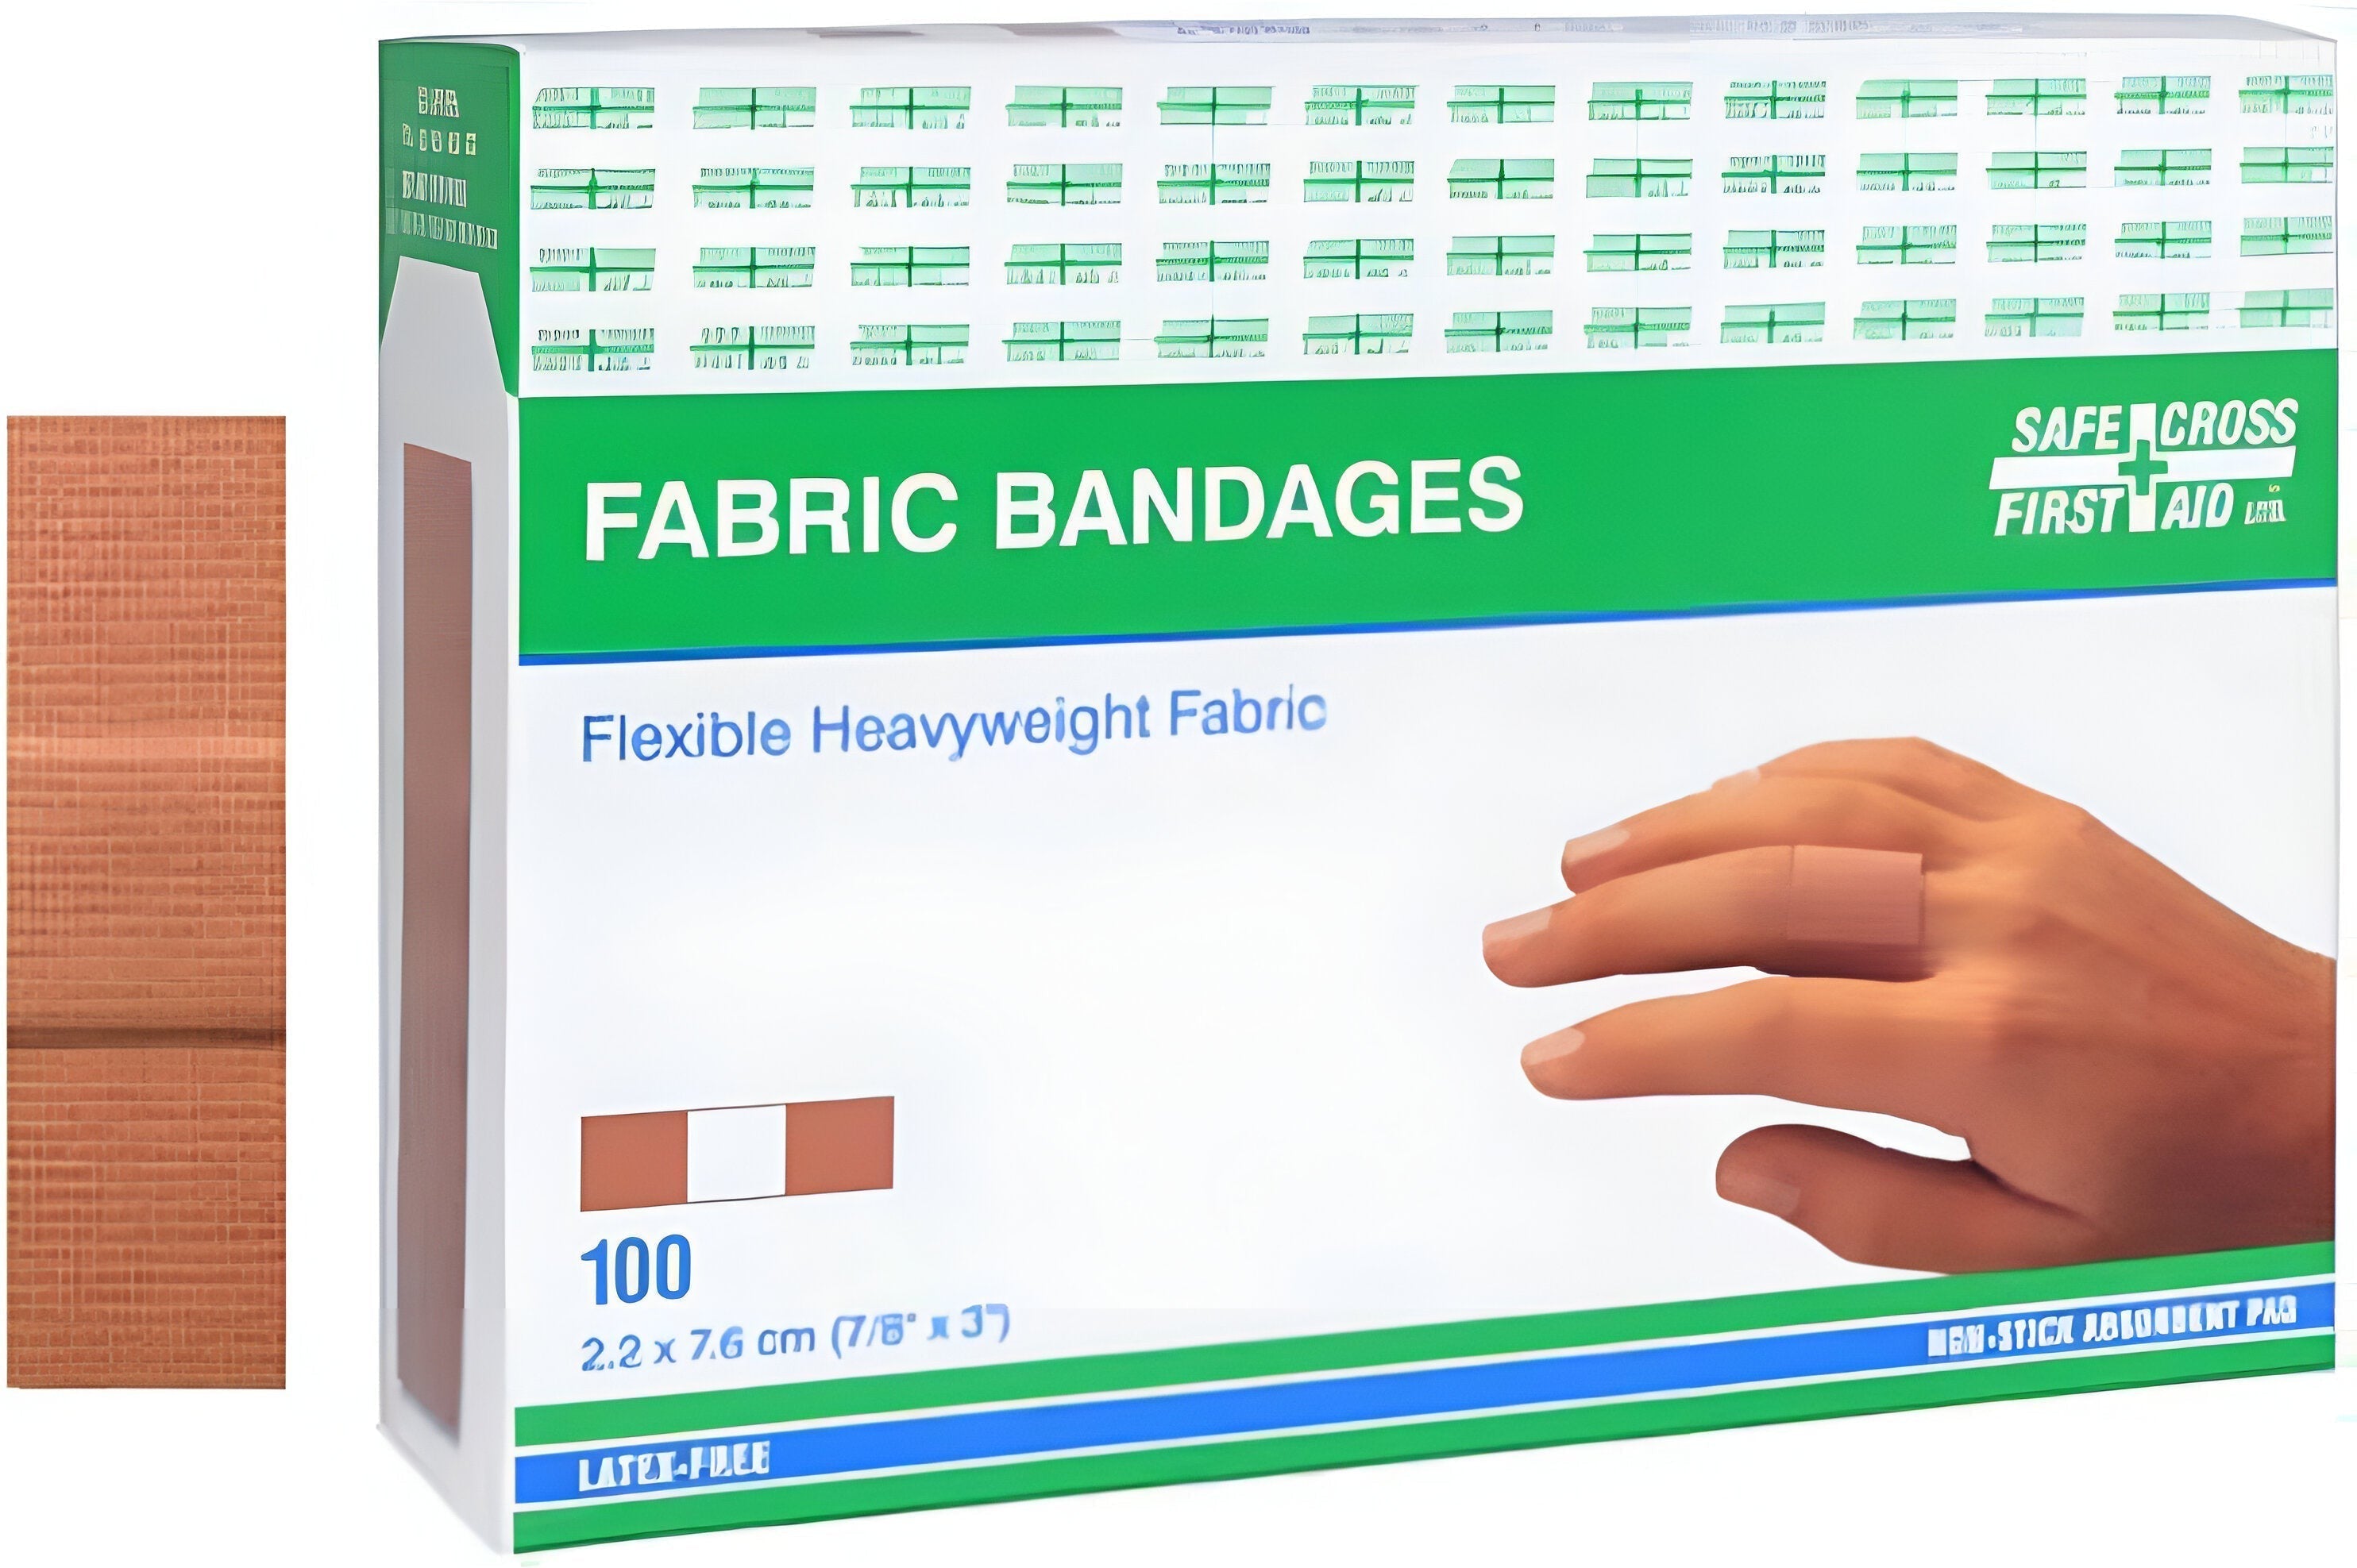 Safecross - 0.87" x 3" Heavy weight Fabric Bandages, 100/bx - 02003026I